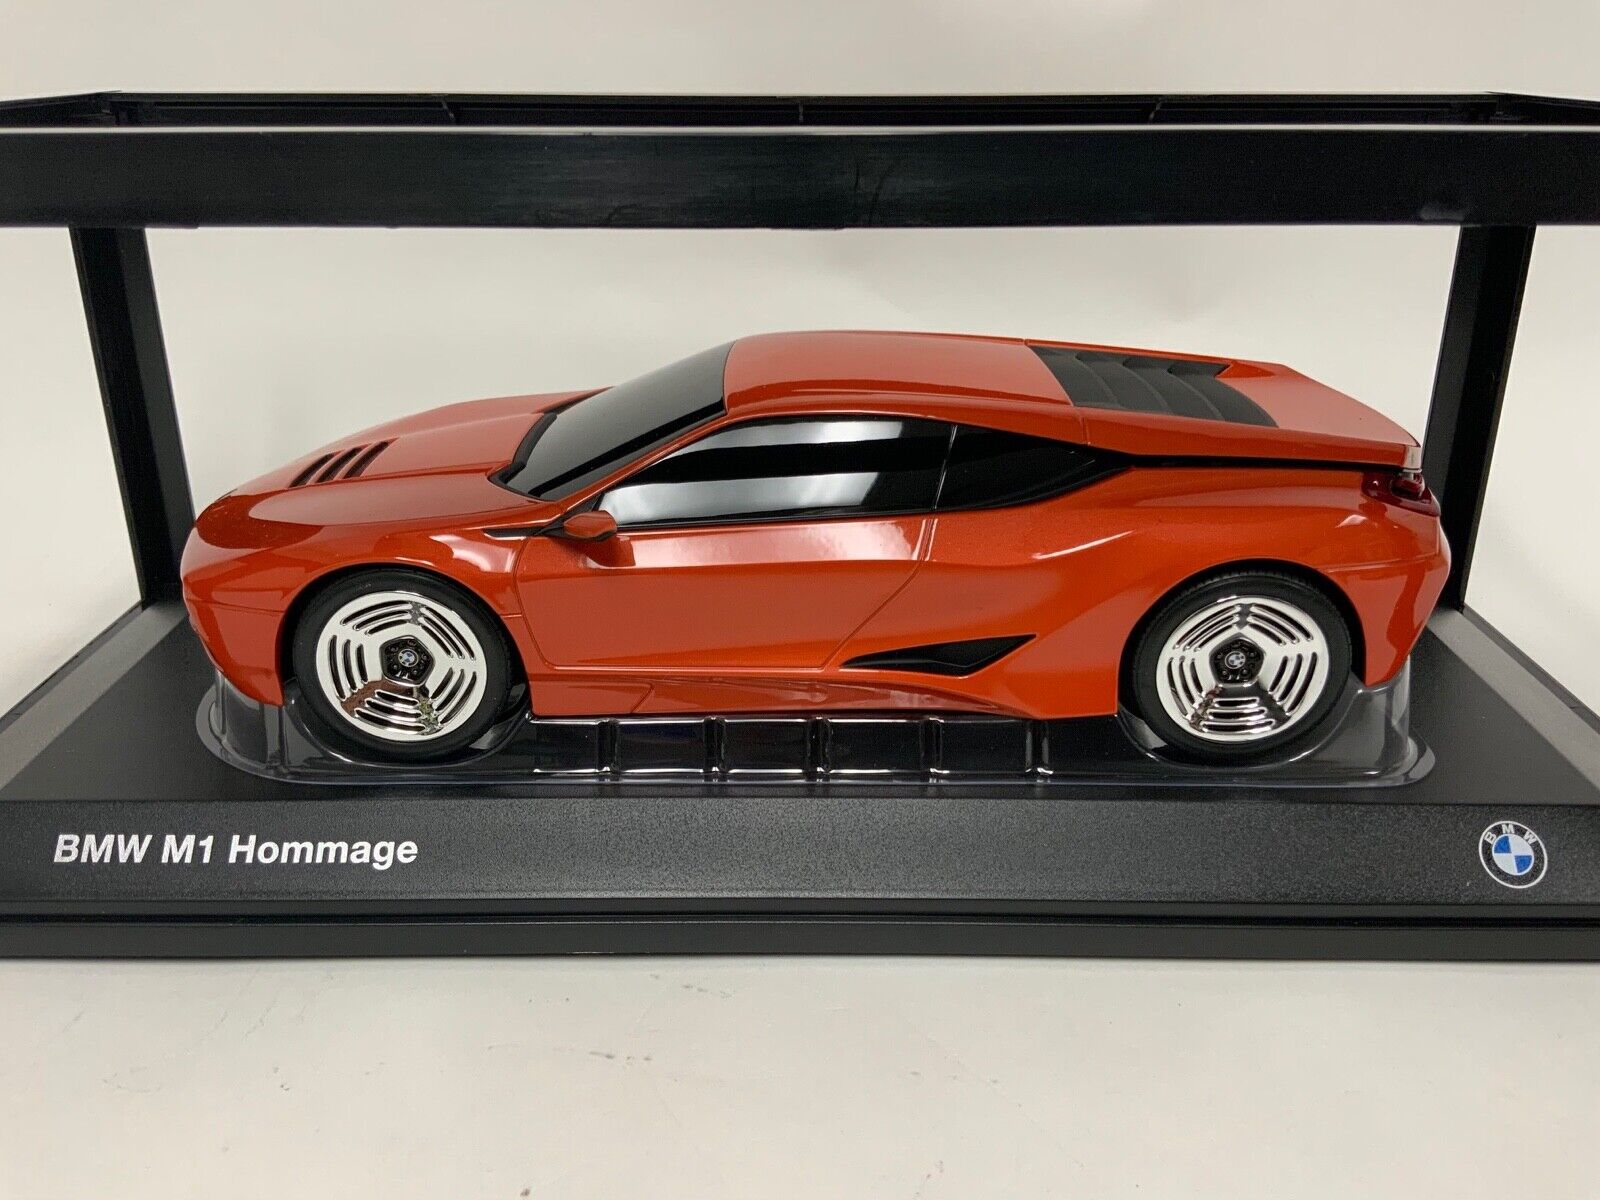 1/18 Norev BMW M1 HOMMAGE Collection in Orange 80 43 2 413 752 NC1165